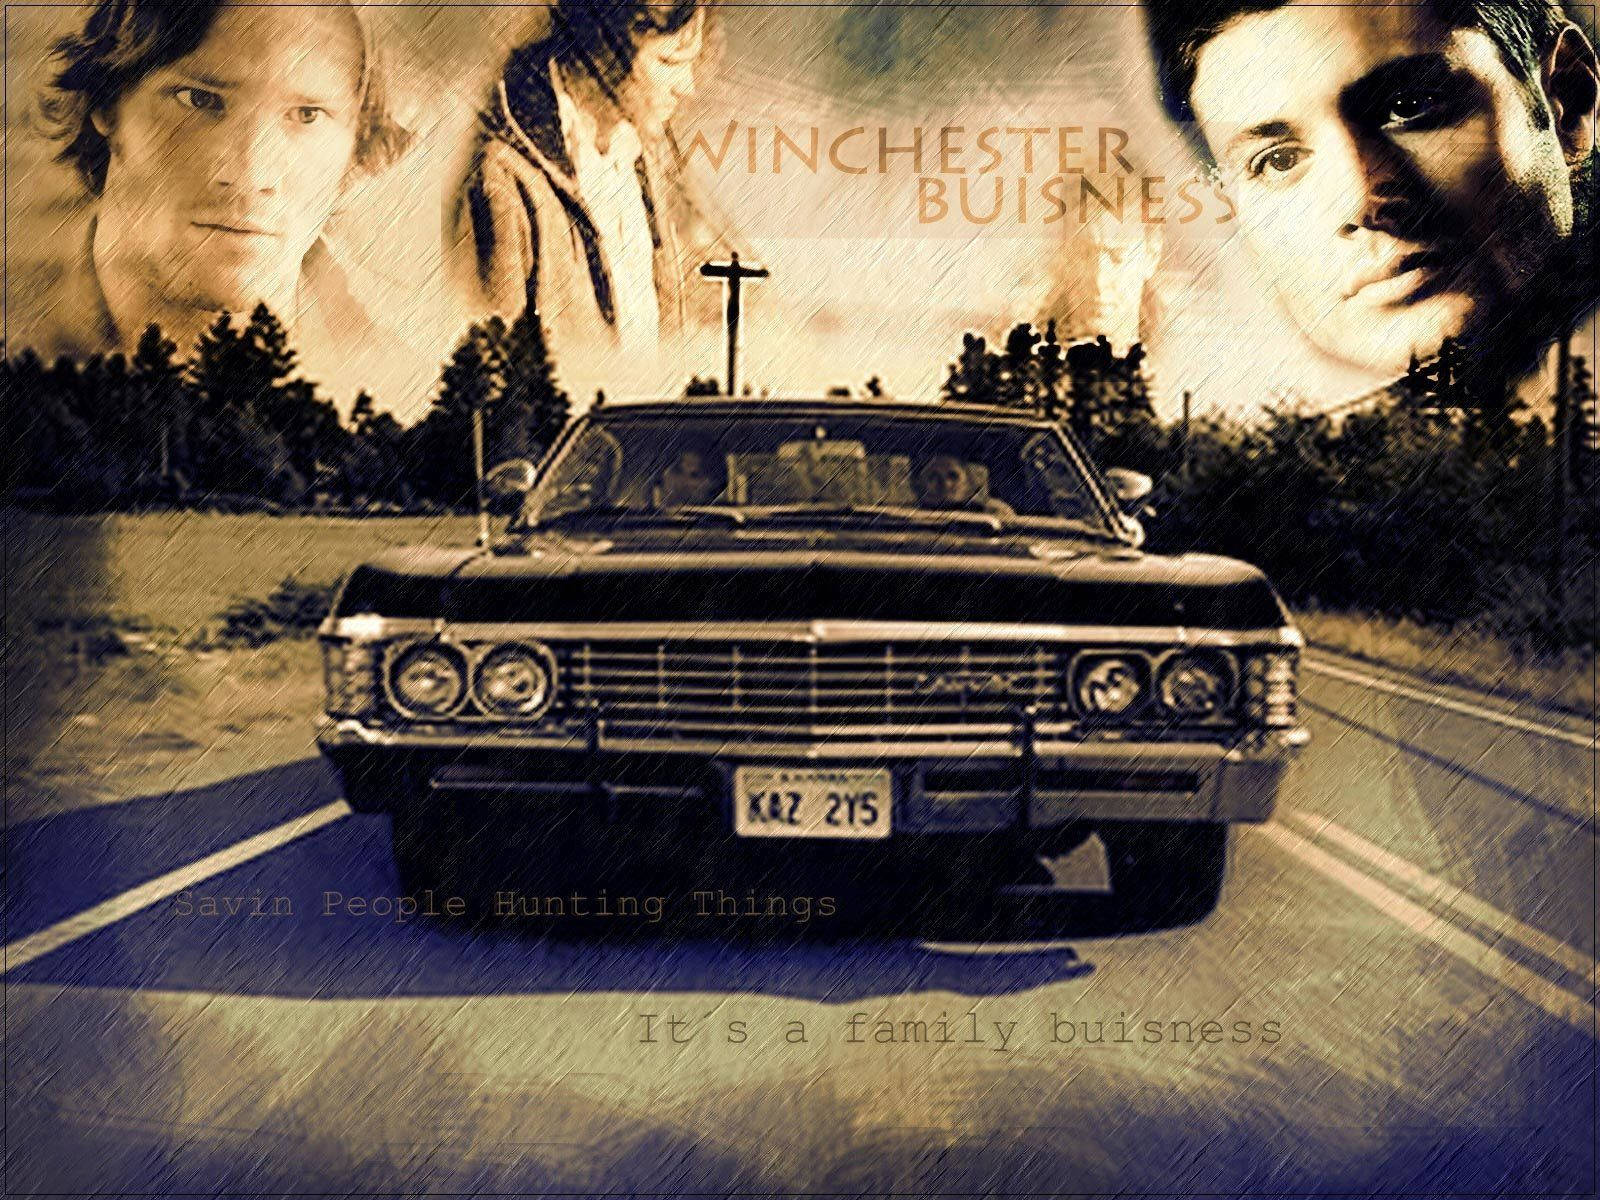 The Winchesters Show They Mean Business With Their Beloved Impala